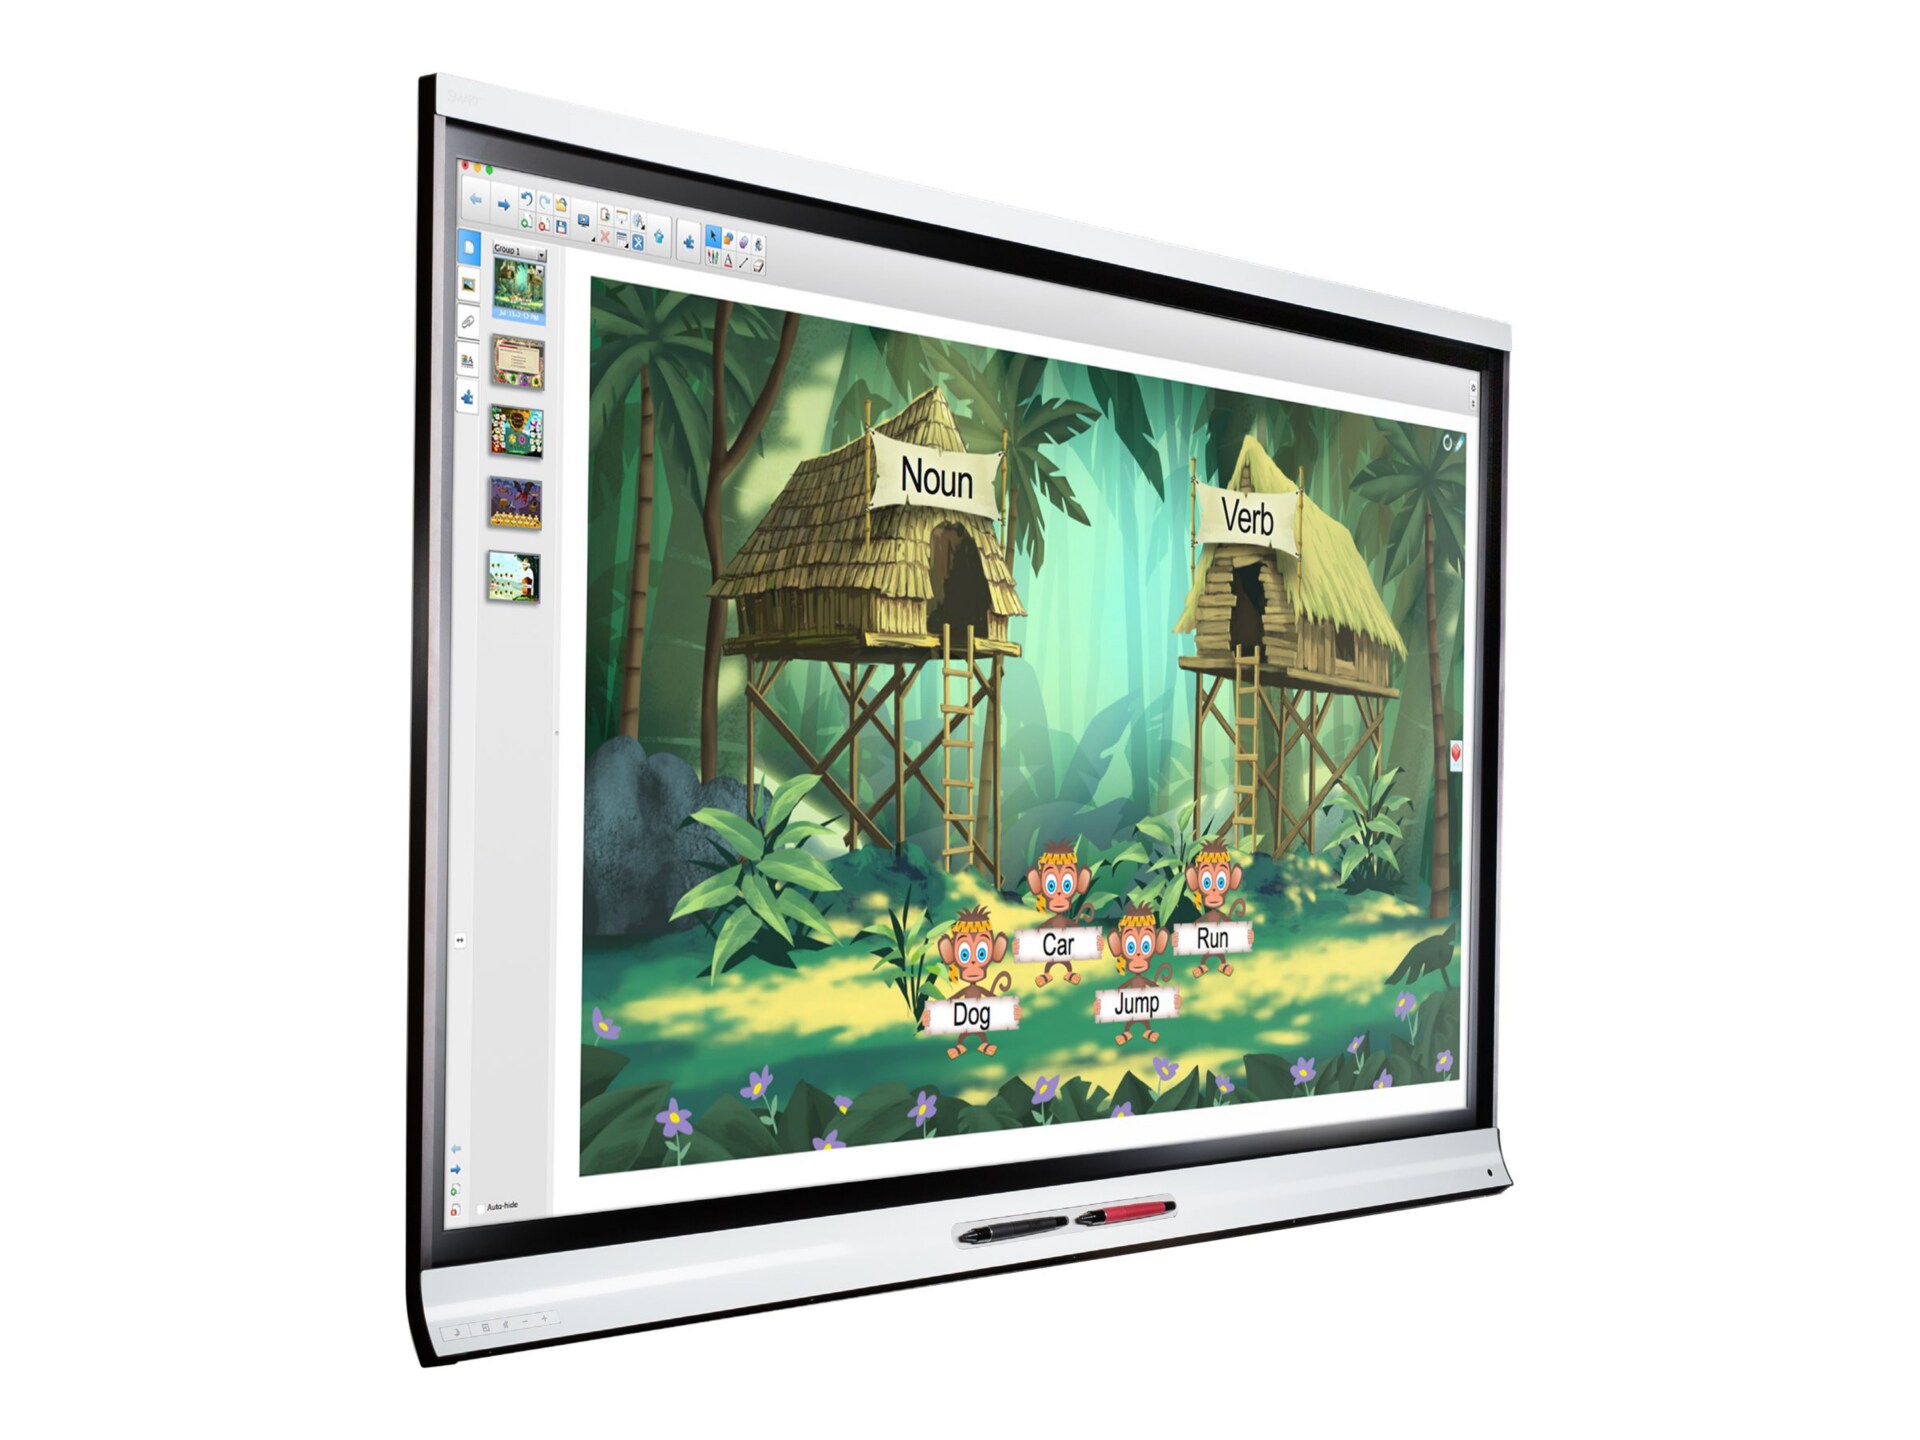 SMART Board 6265-V2 interactive flat panel with iQ 65" Class (64.5" viewable) LED display